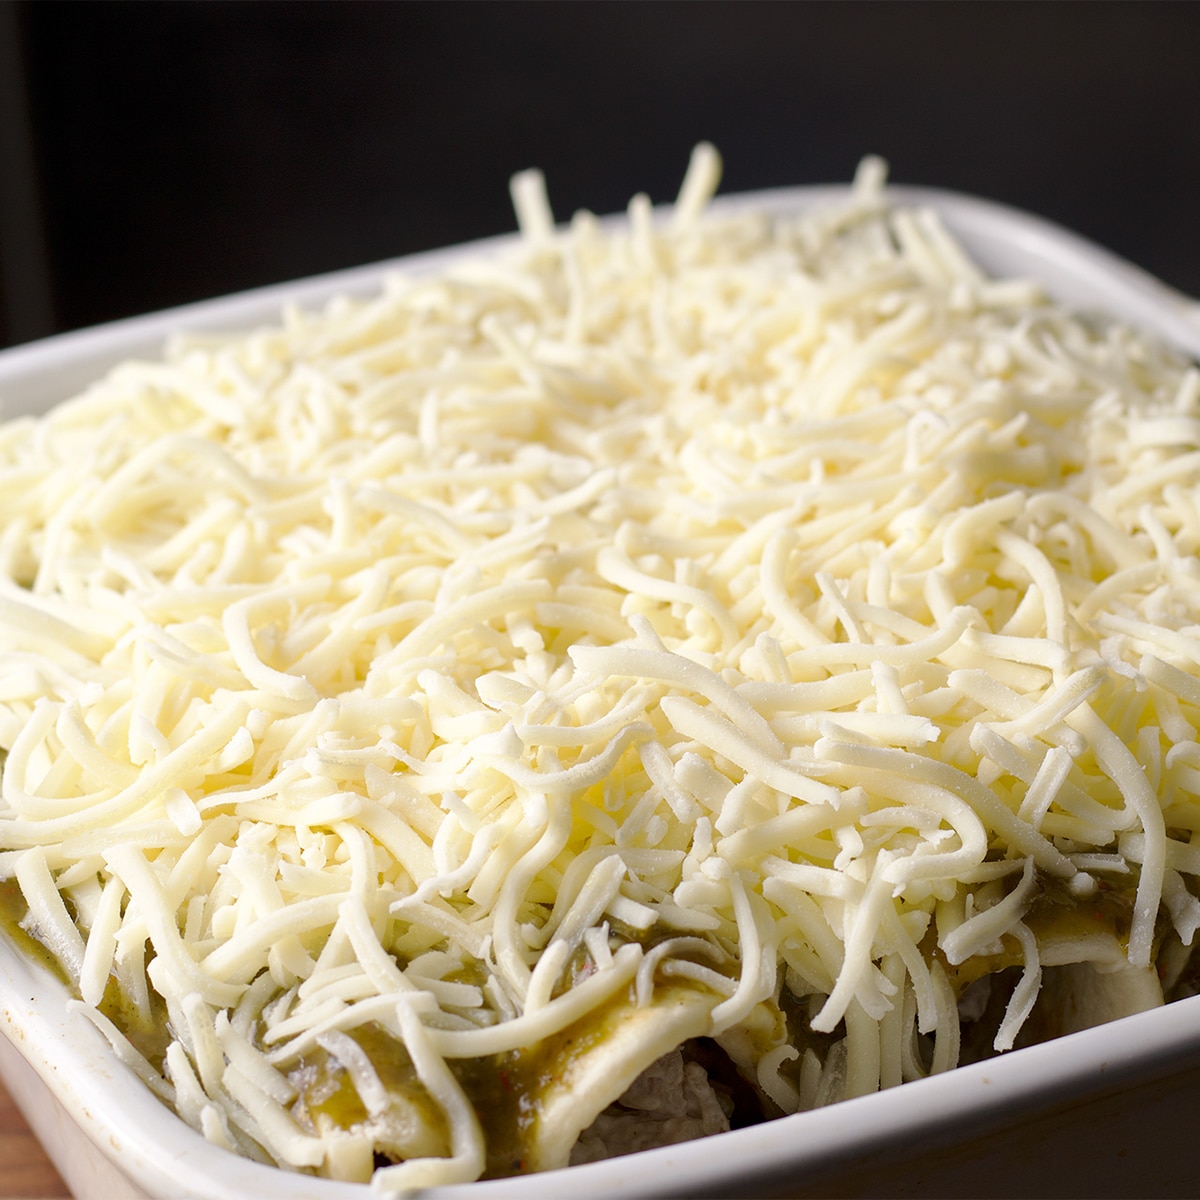 Topping chicken enchiladas with creamy salsa verde and grated cheese.